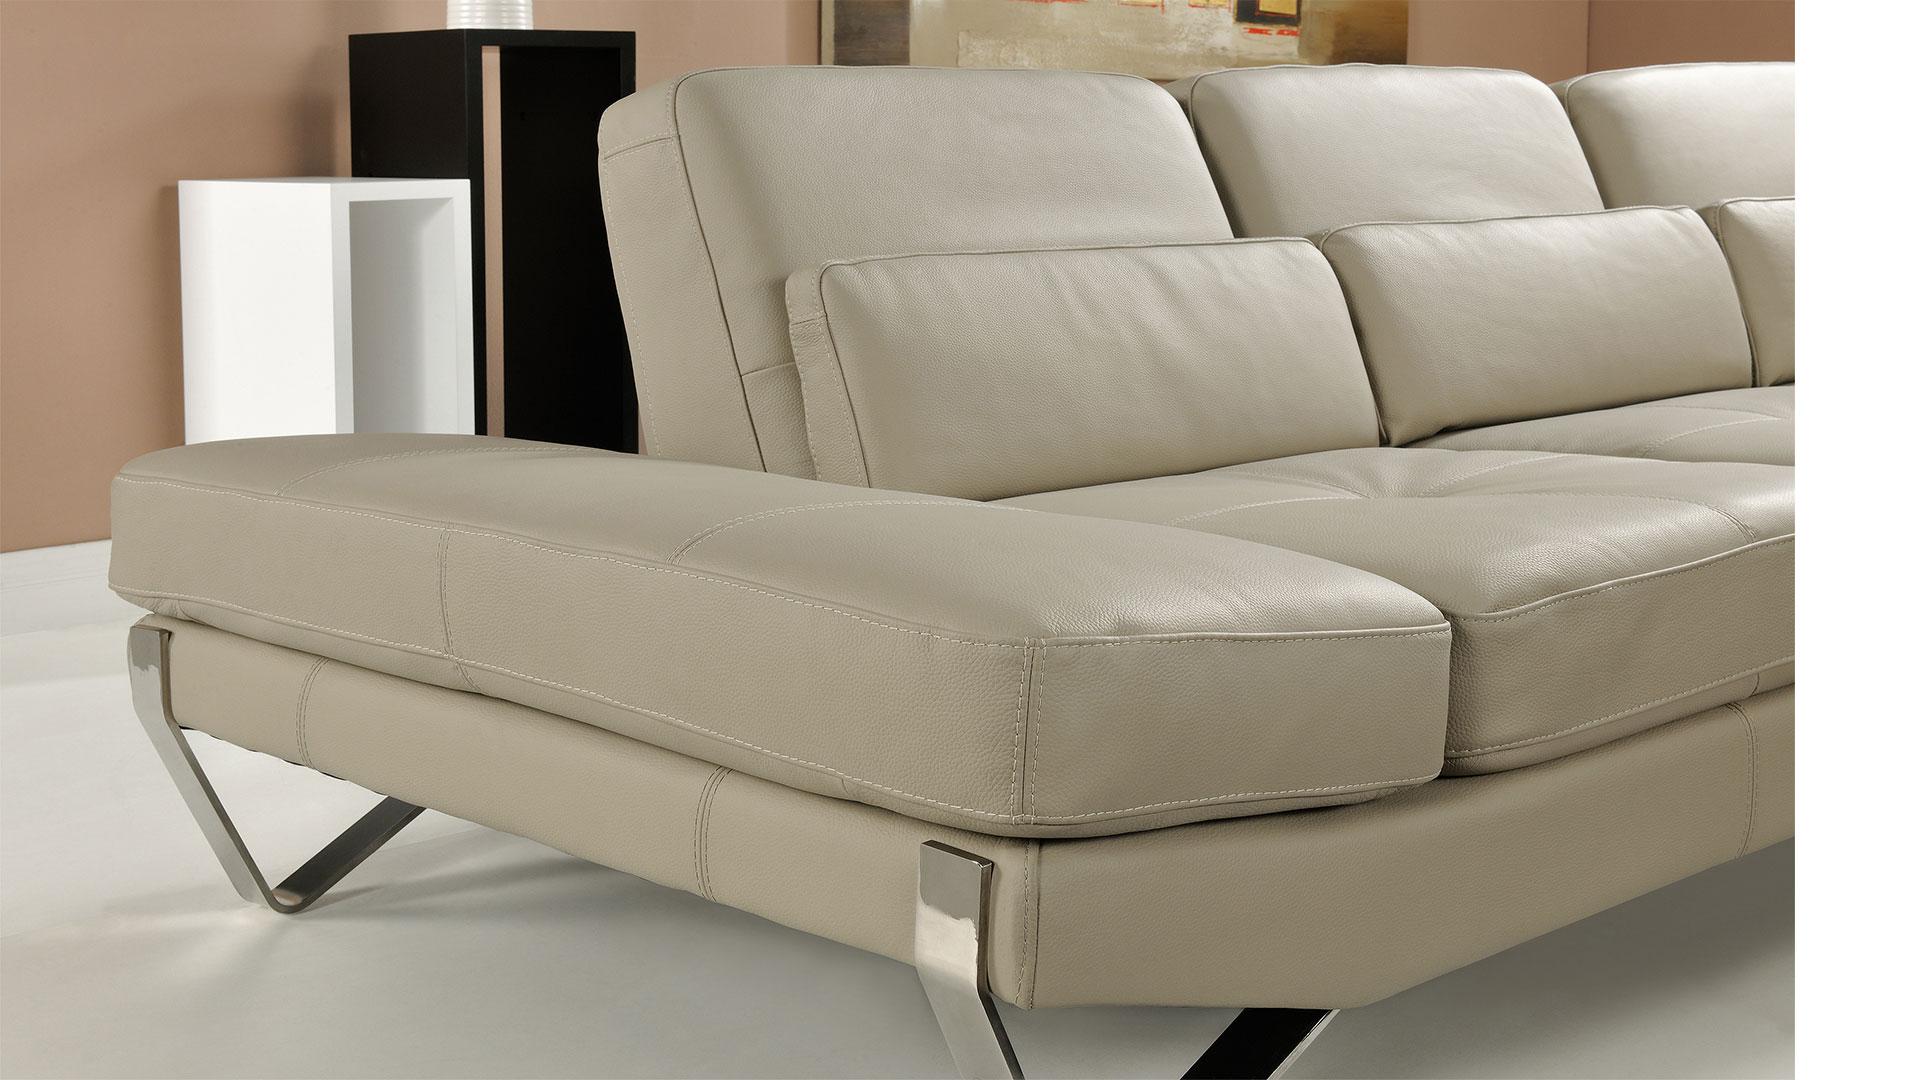 

    
At Home USA Bianca Beige Sectional Couch Italian Leather Contemporary Style
